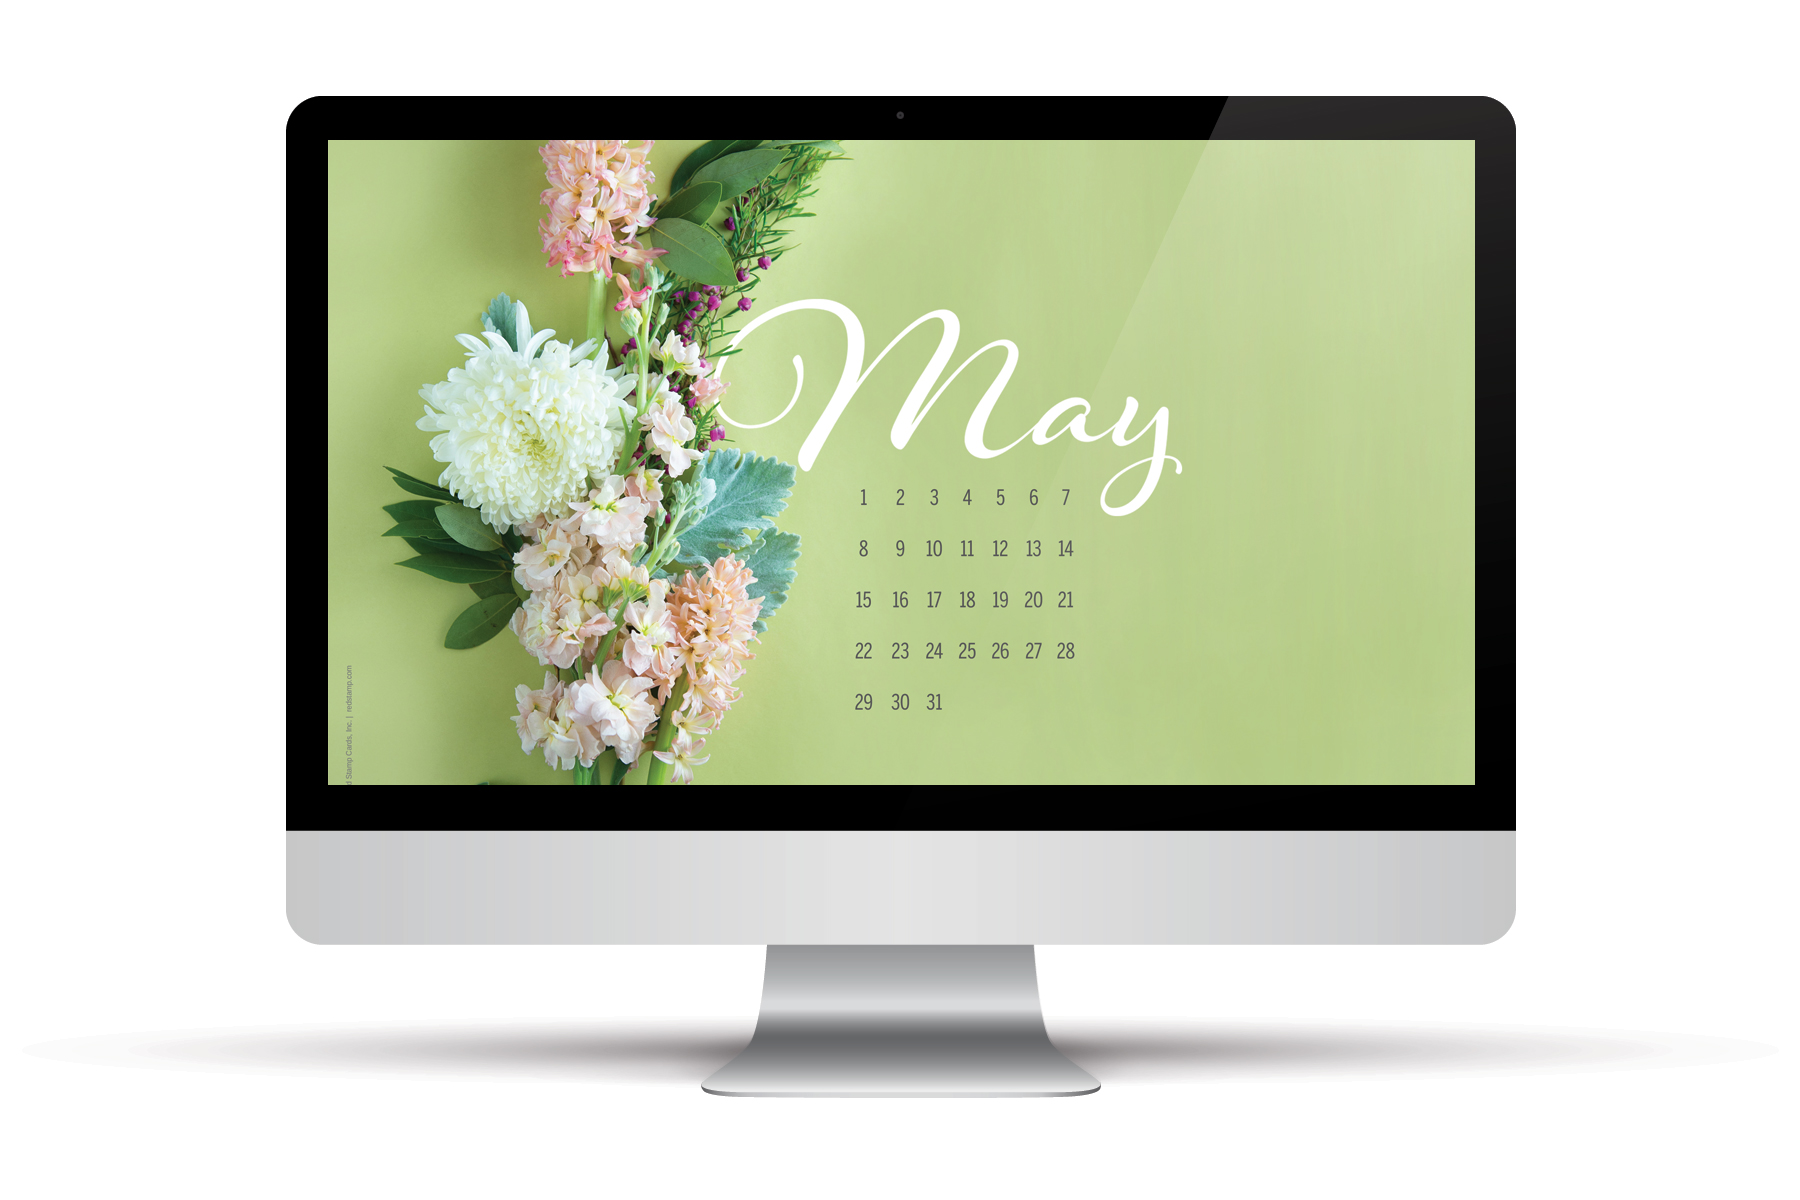 Enjoy our May free calendars and wallpaper We were inspired